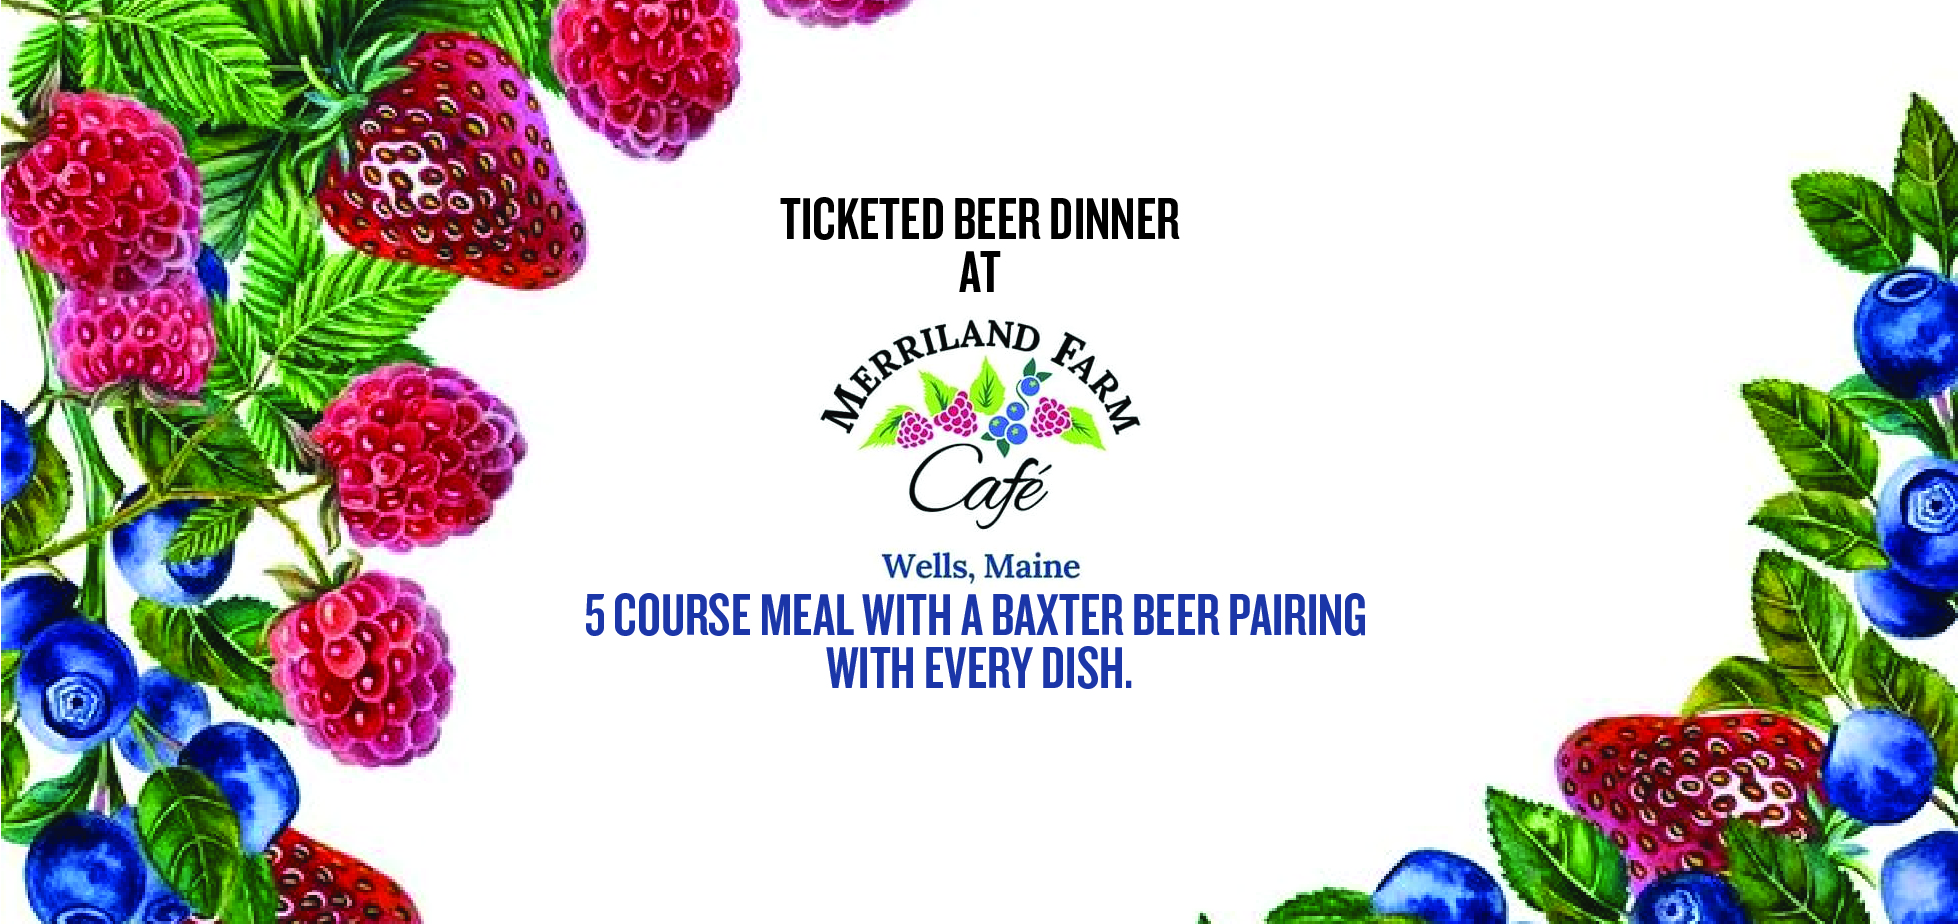 Promoting a beer dinner at Merriland Farm Cafe on November 17th